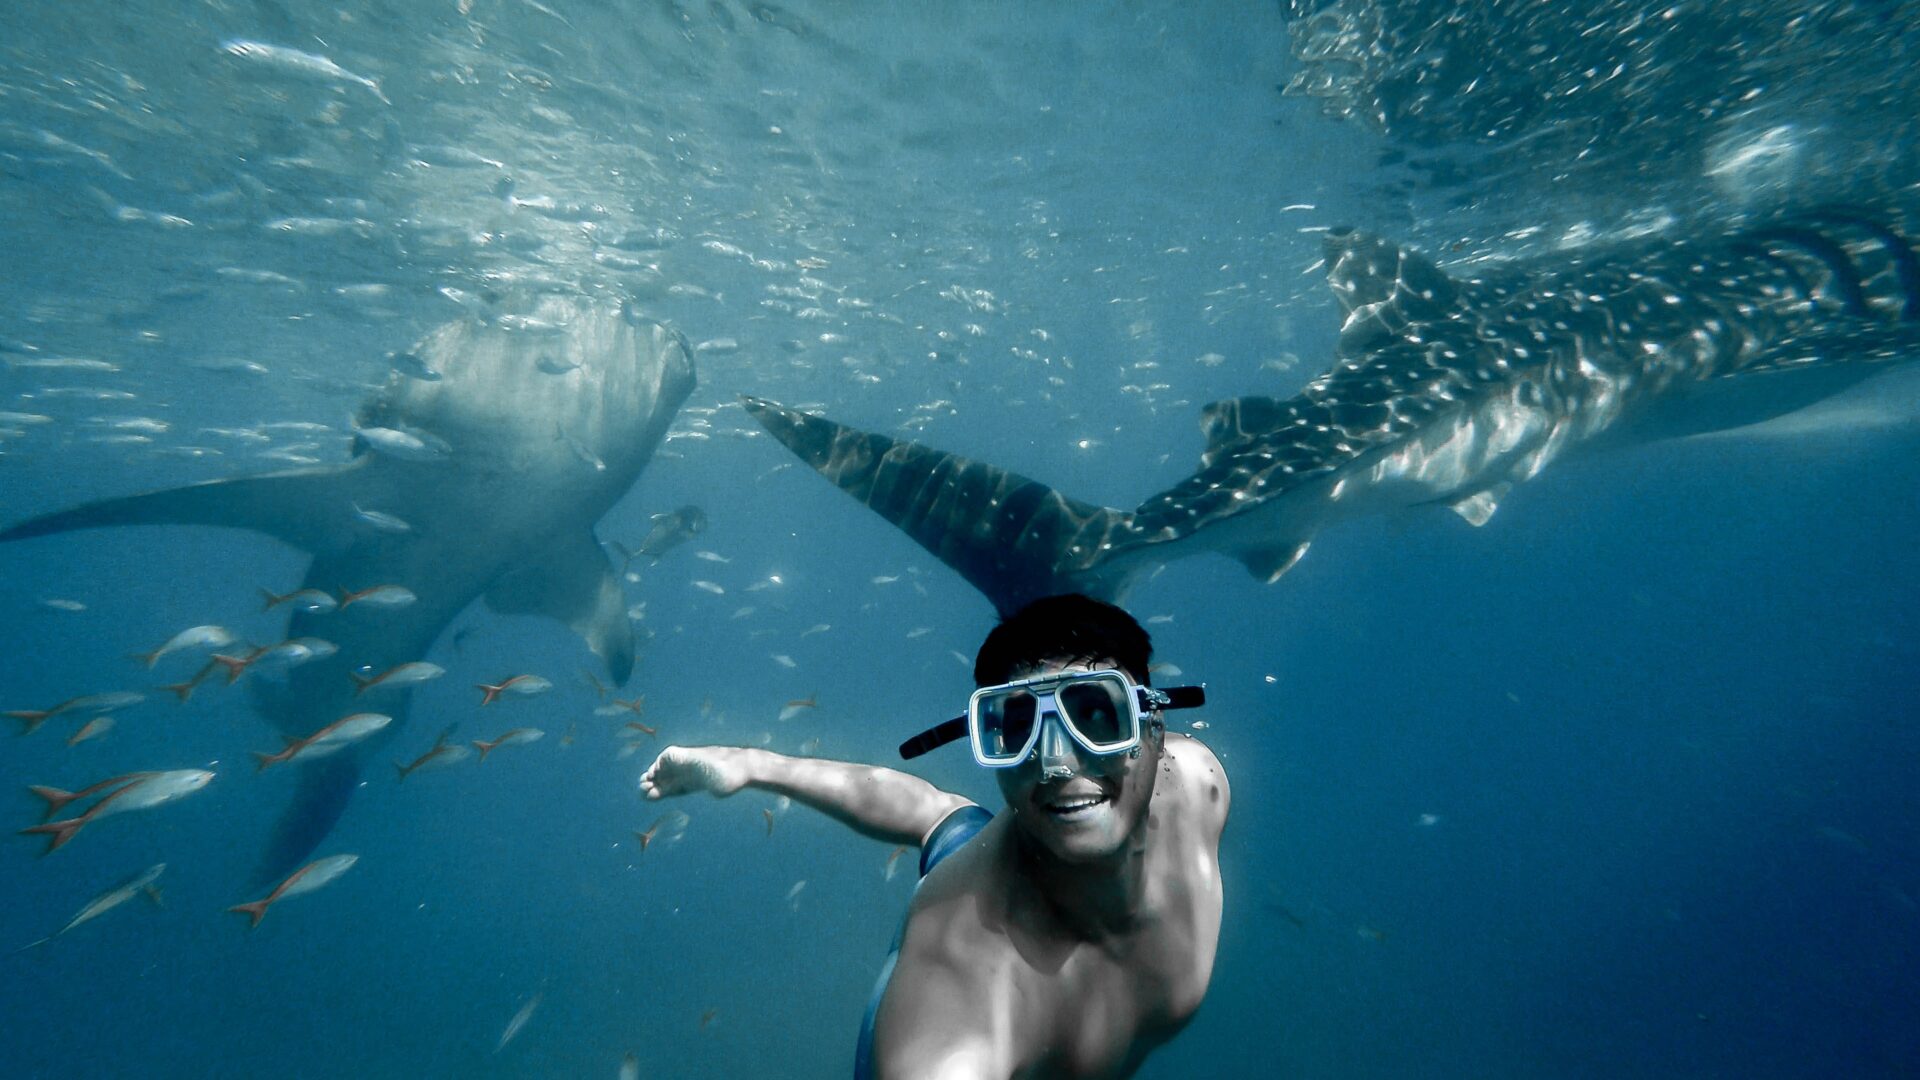 Man Under Water With Sharks and Small Fishes